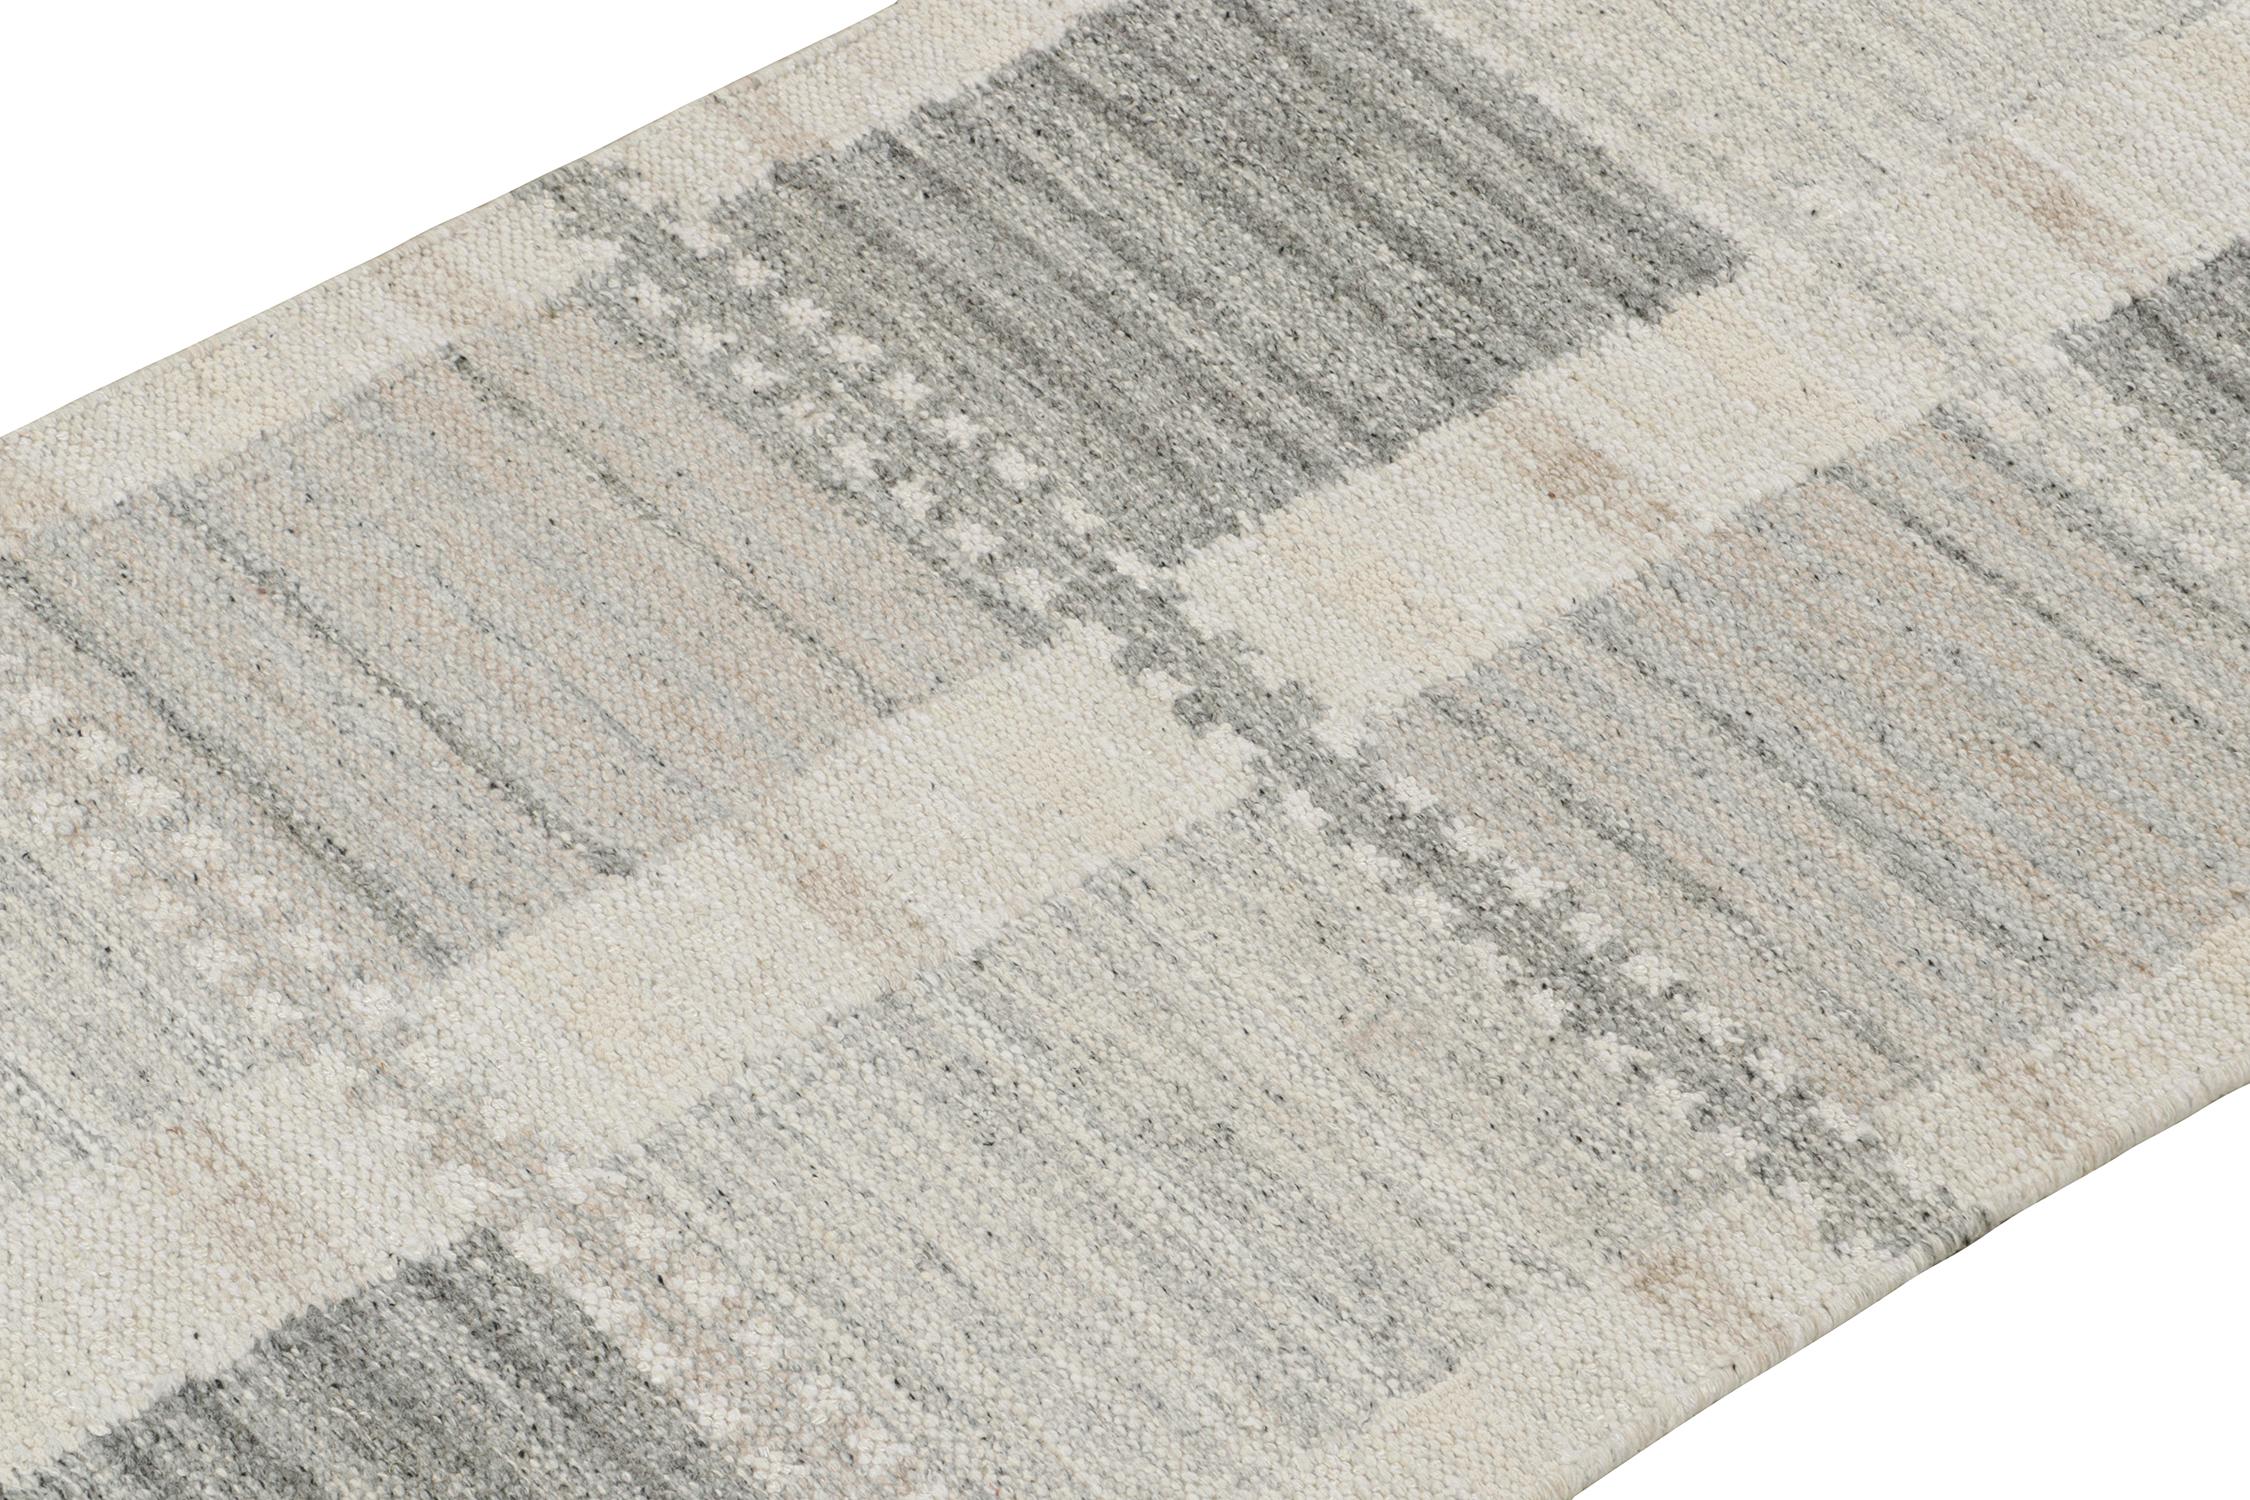 Indian Rug & Kilim’s Scandinavian Style Kilim runner with Patterns in White & Grey For Sale